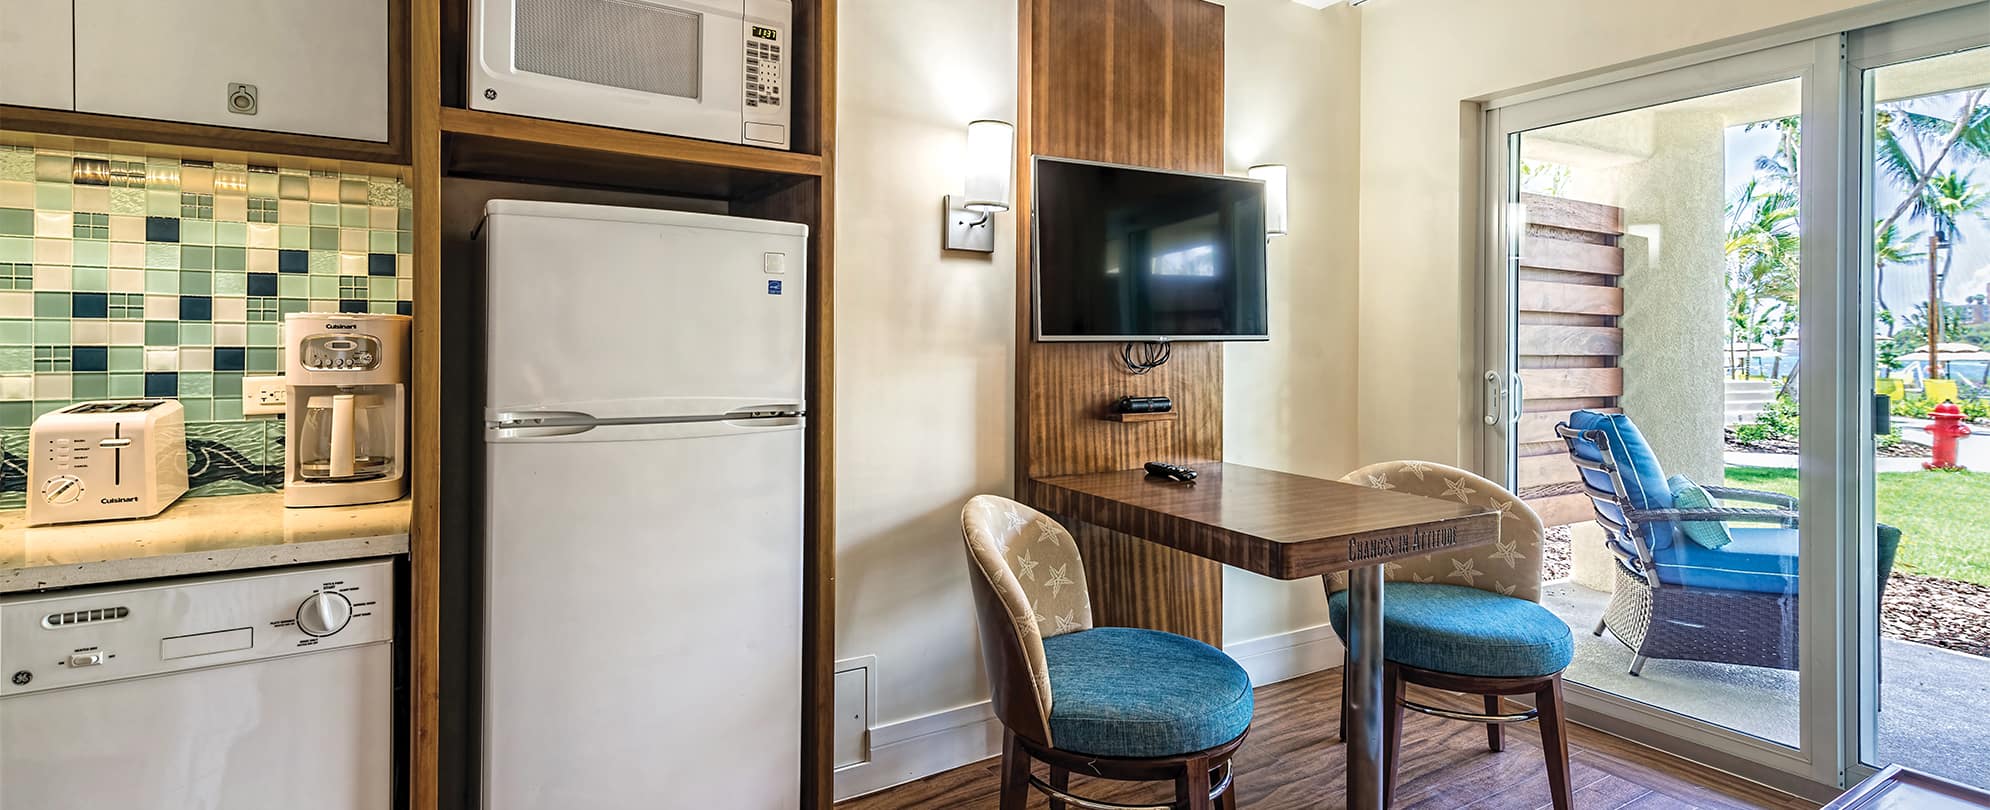 Fridge, microwave, and small table with two chairs in a studio suite at Margaritaville Vacation Club by Wyndham - St. Thomas.